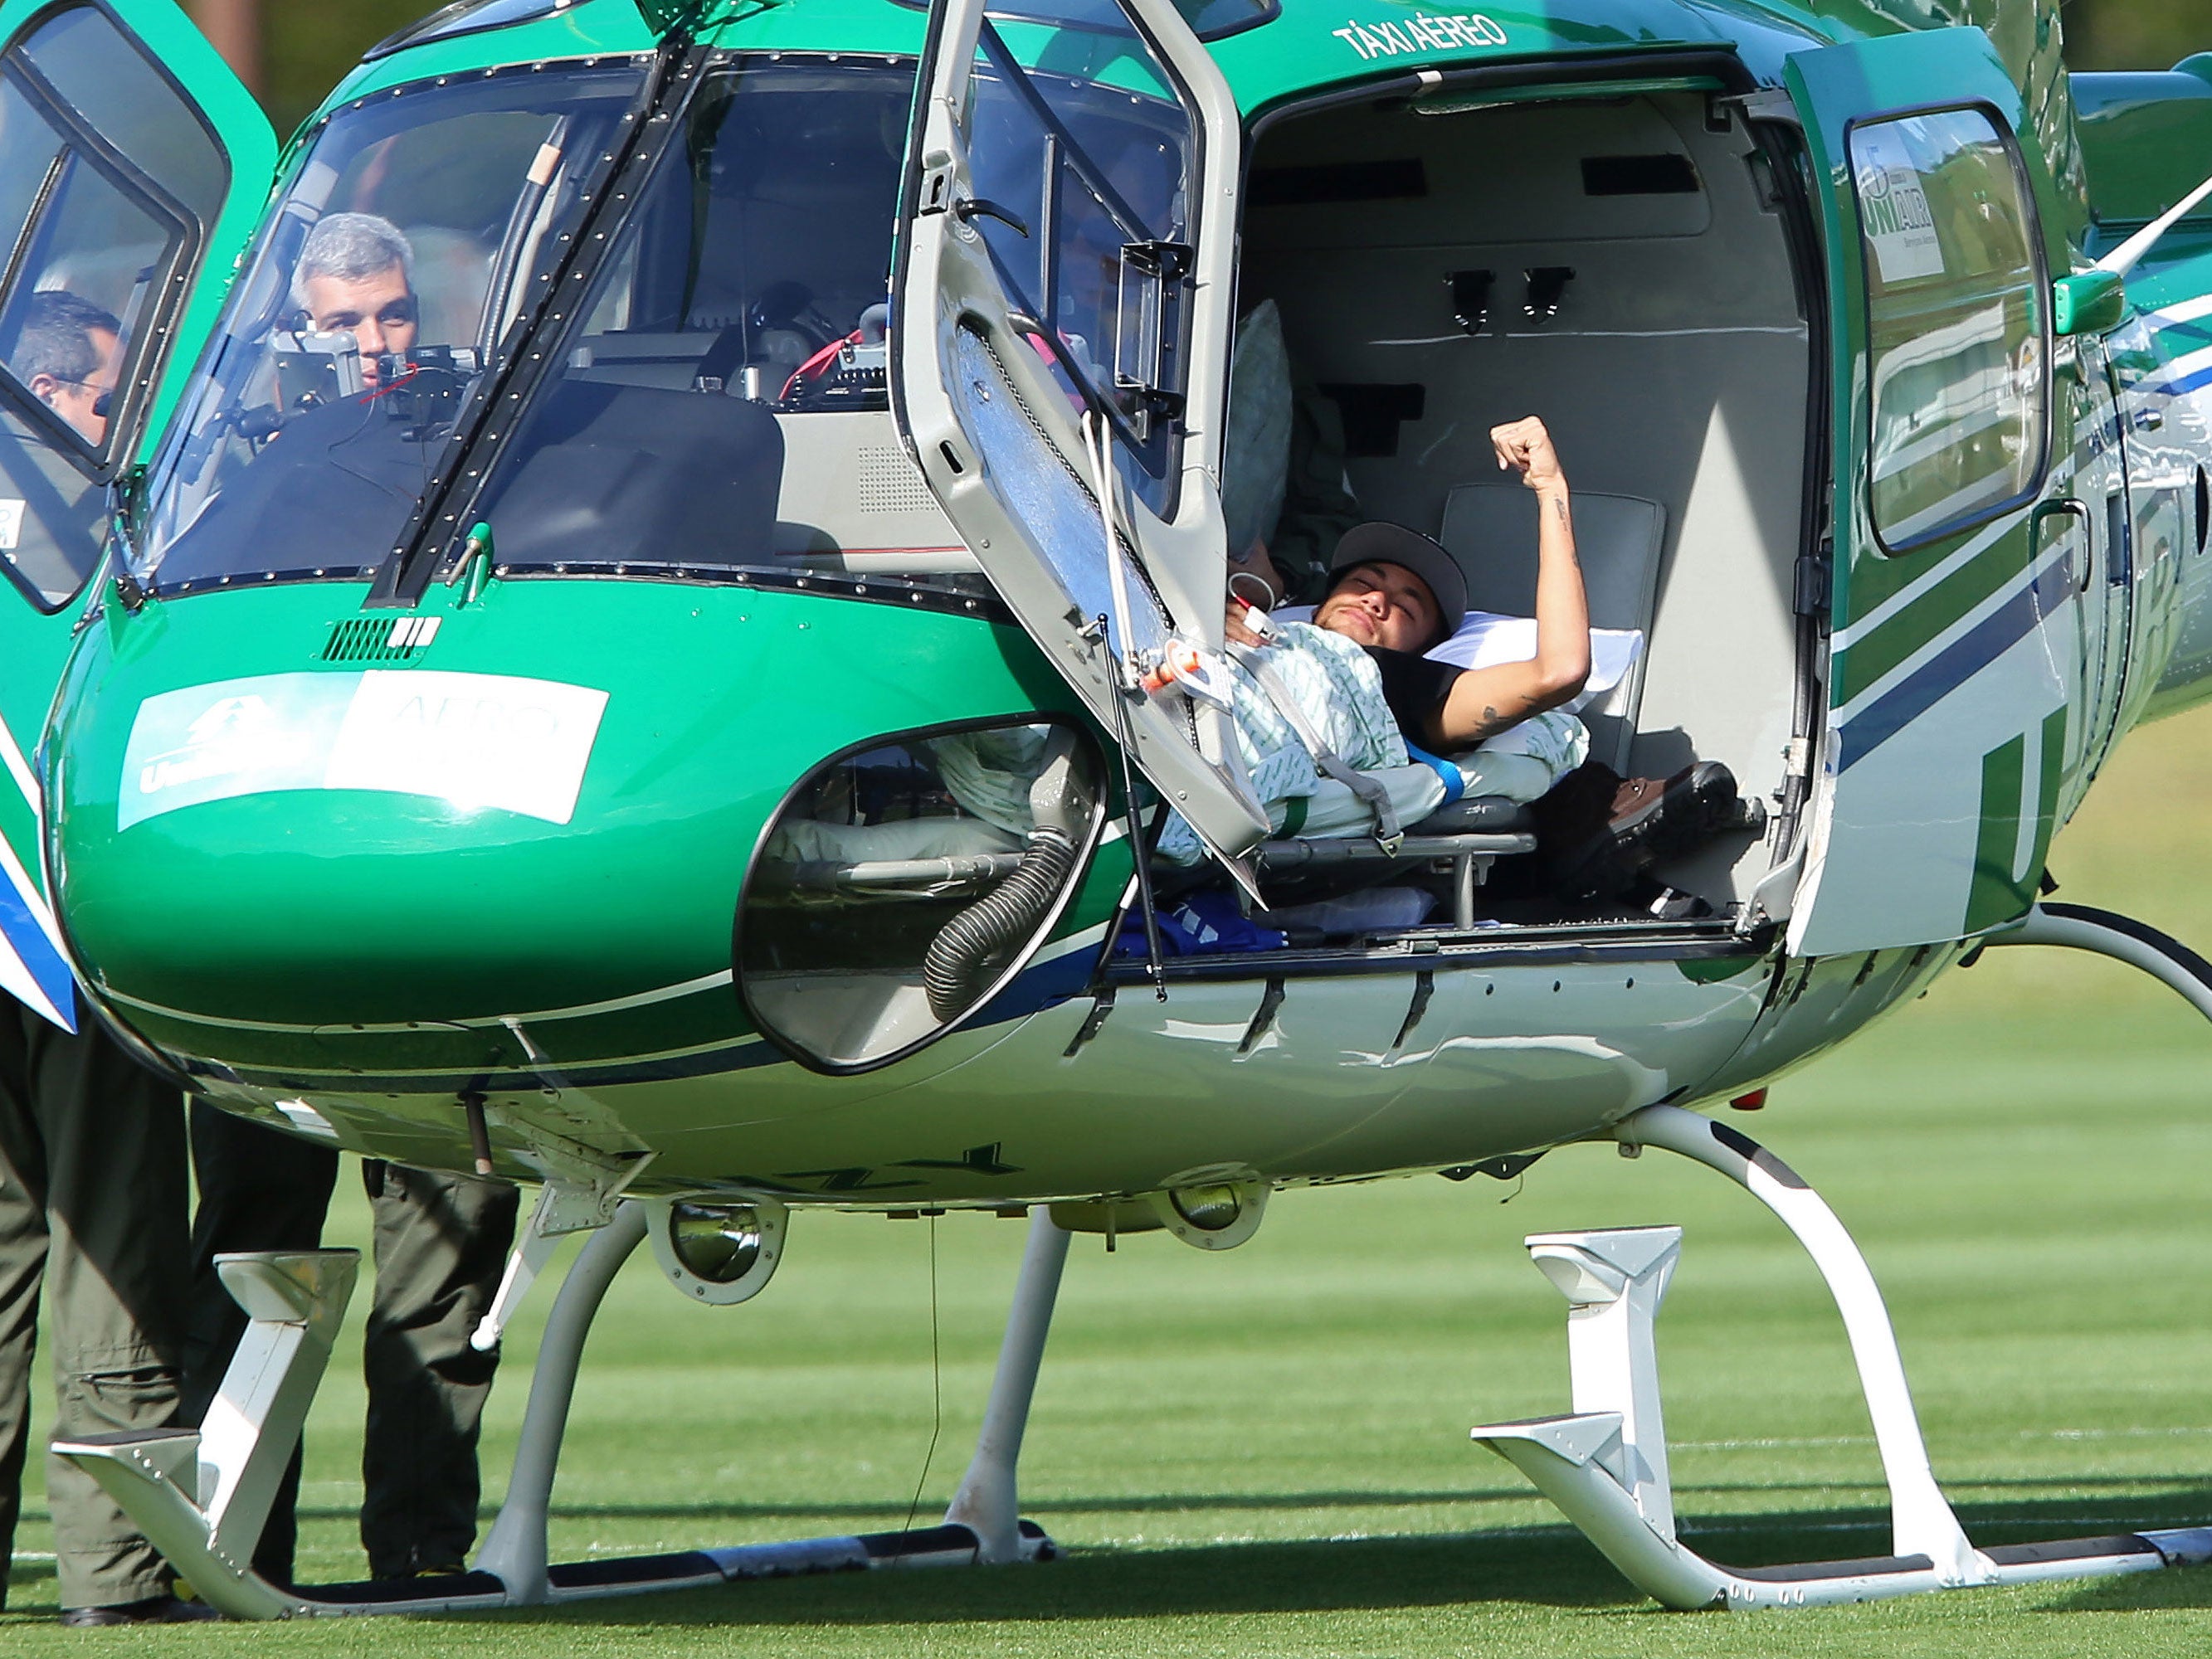 Brazil's Neymar is seen inside a medical helicopter at the Granja Comary training center in Teresopolis, Brazil. Neymar will be treated at home for his back injury